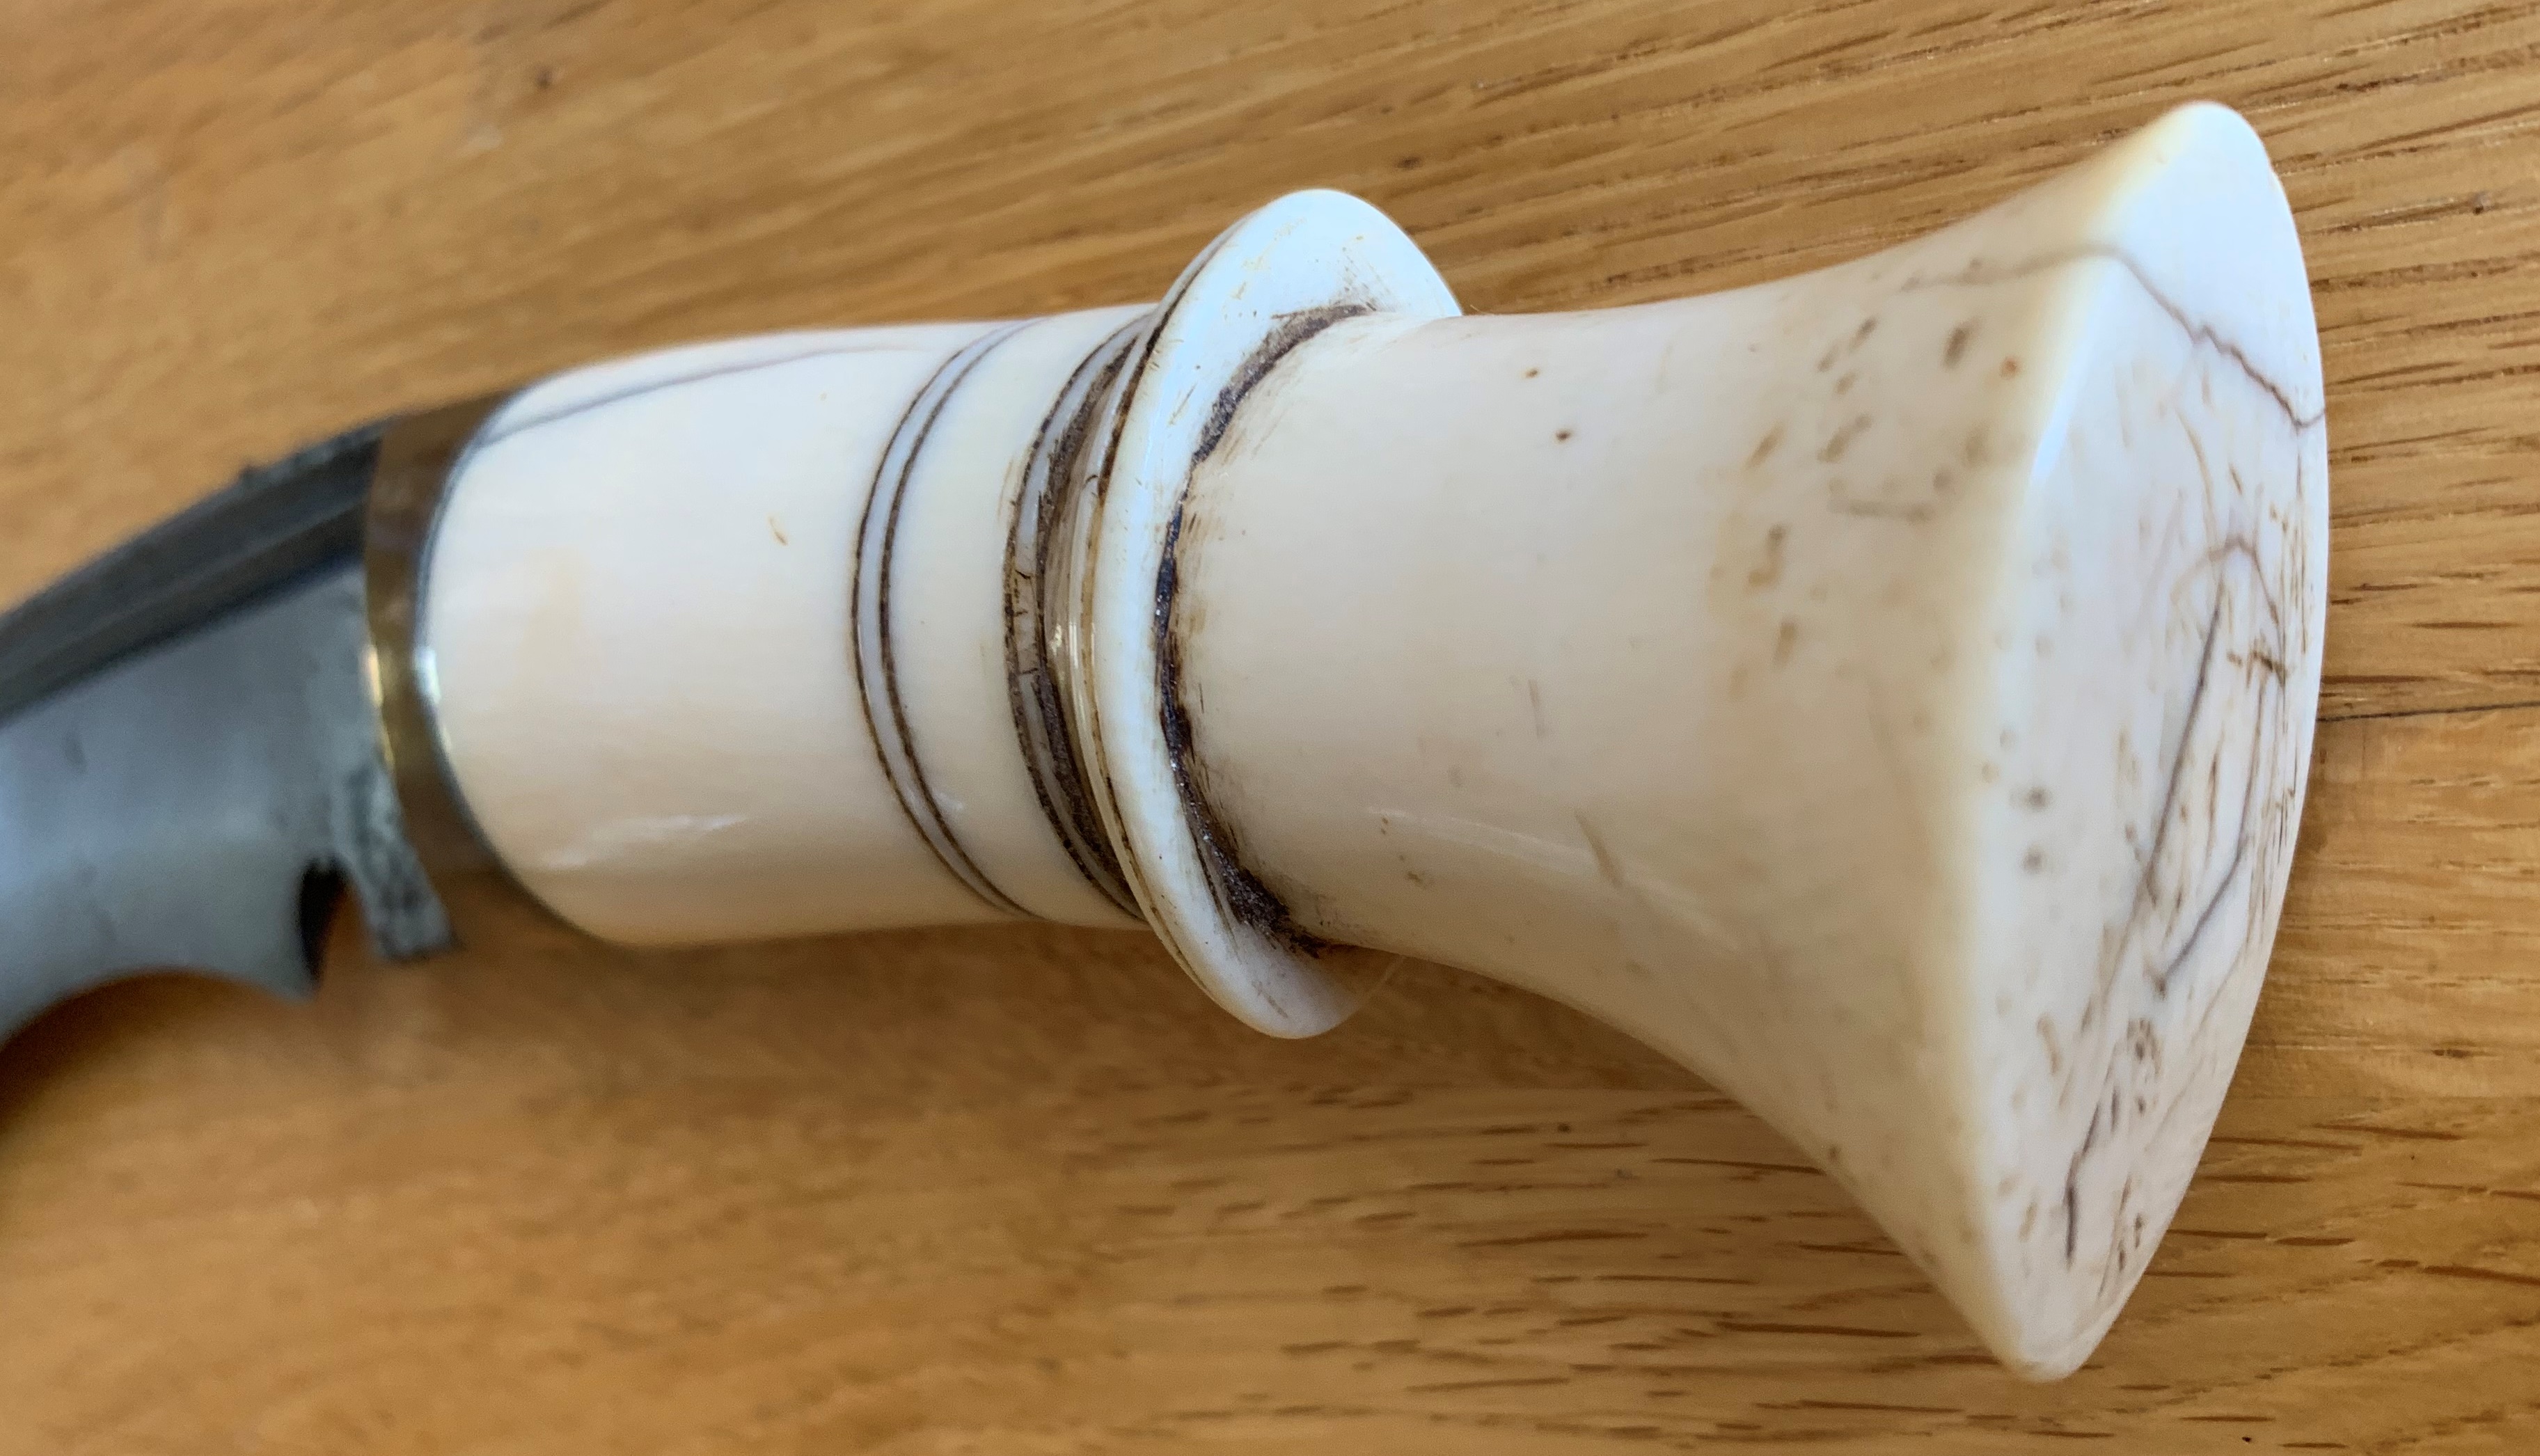 A superb Ivory handled kukri, probably WW1 era, the scabbard inner is original, but the outer is a - Image 5 of 6